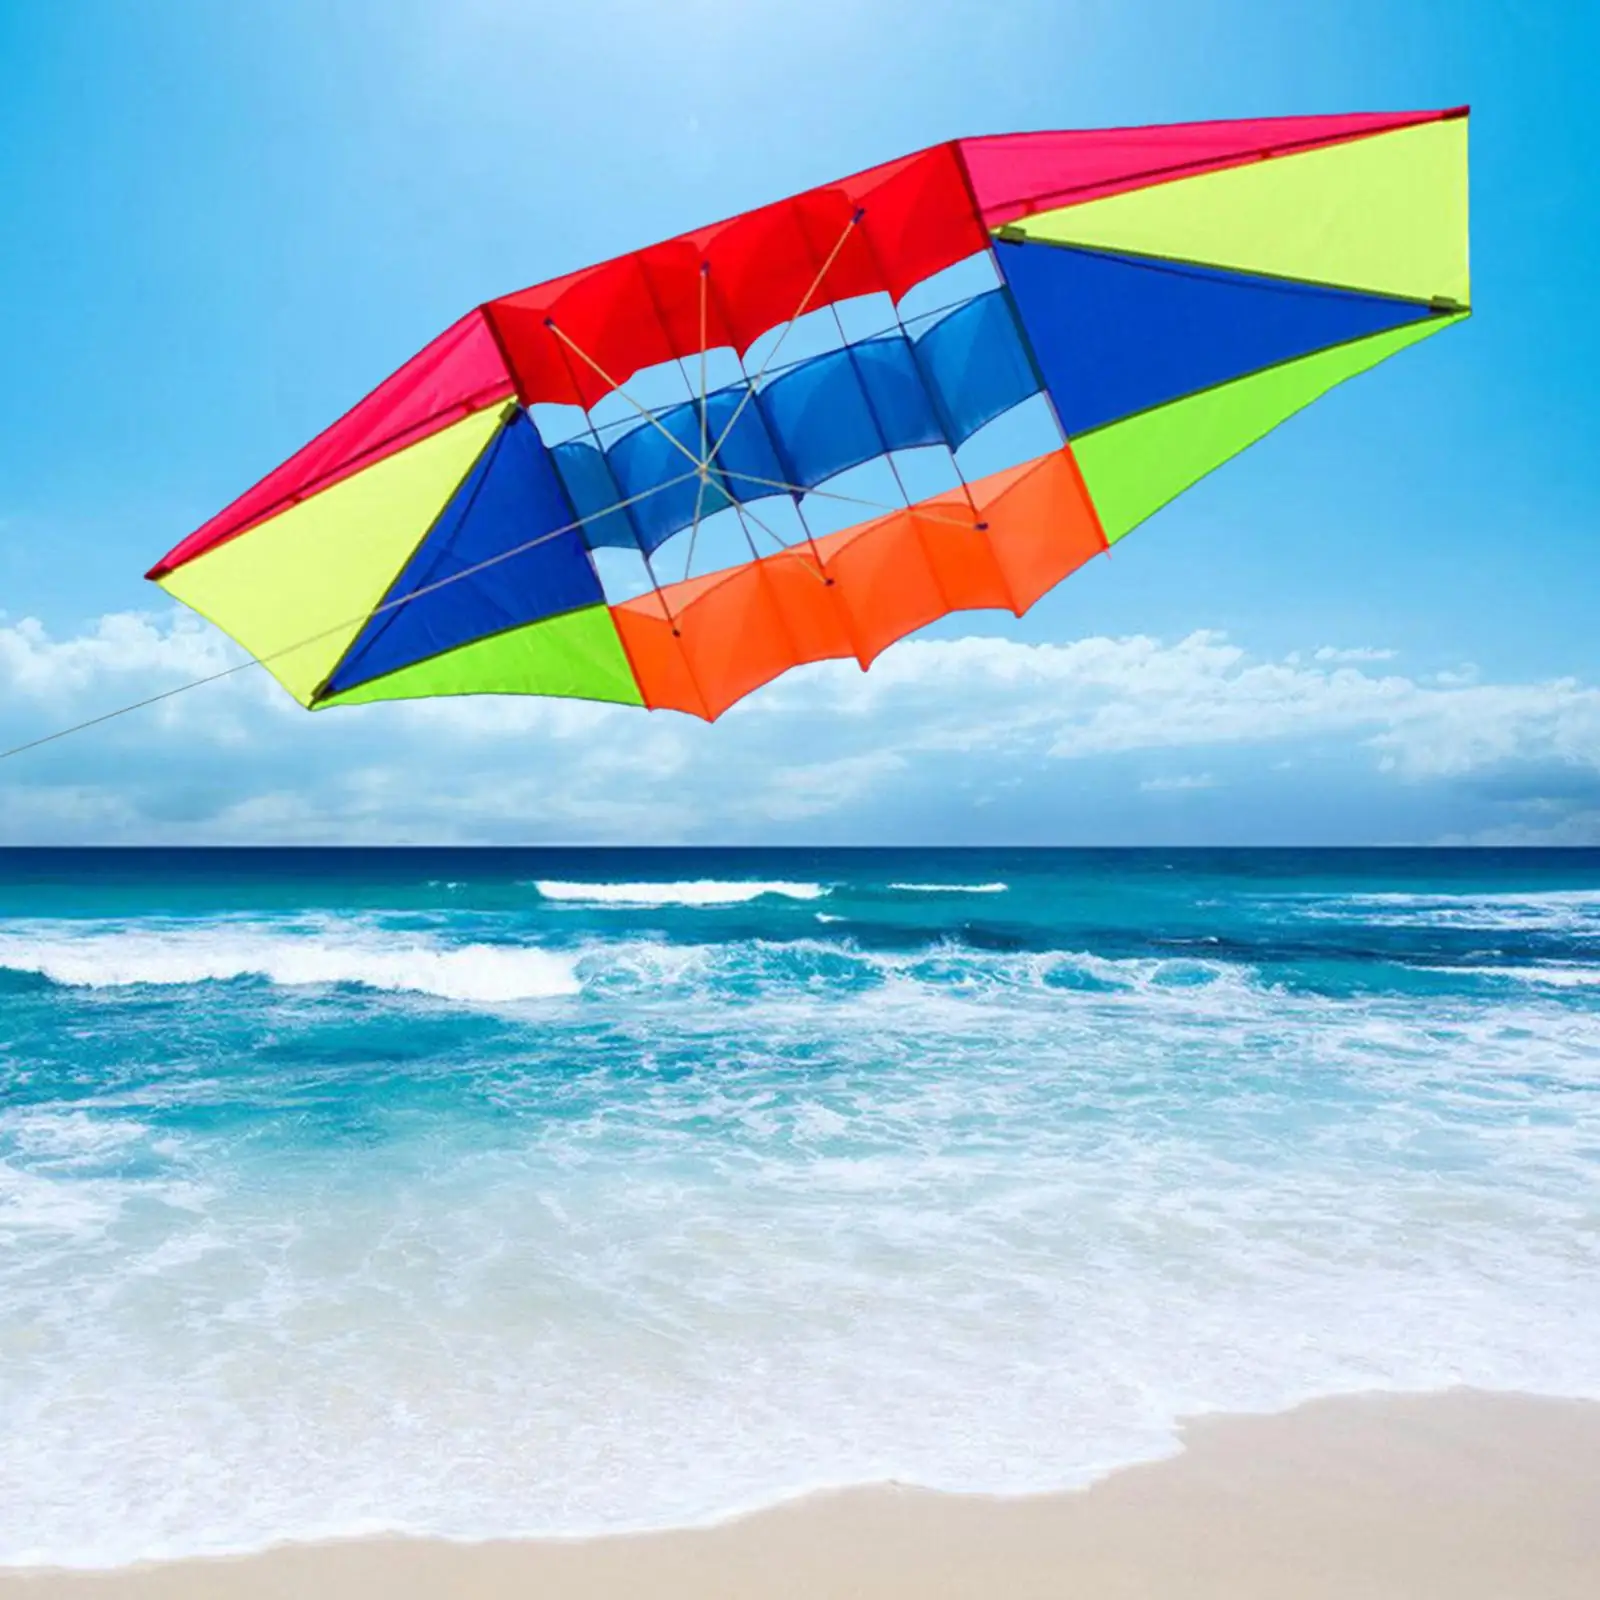 Large Colorful  Toy Outdoor Sports Game Easy to Fly Parachute  Single Line s for Children Kids Adults